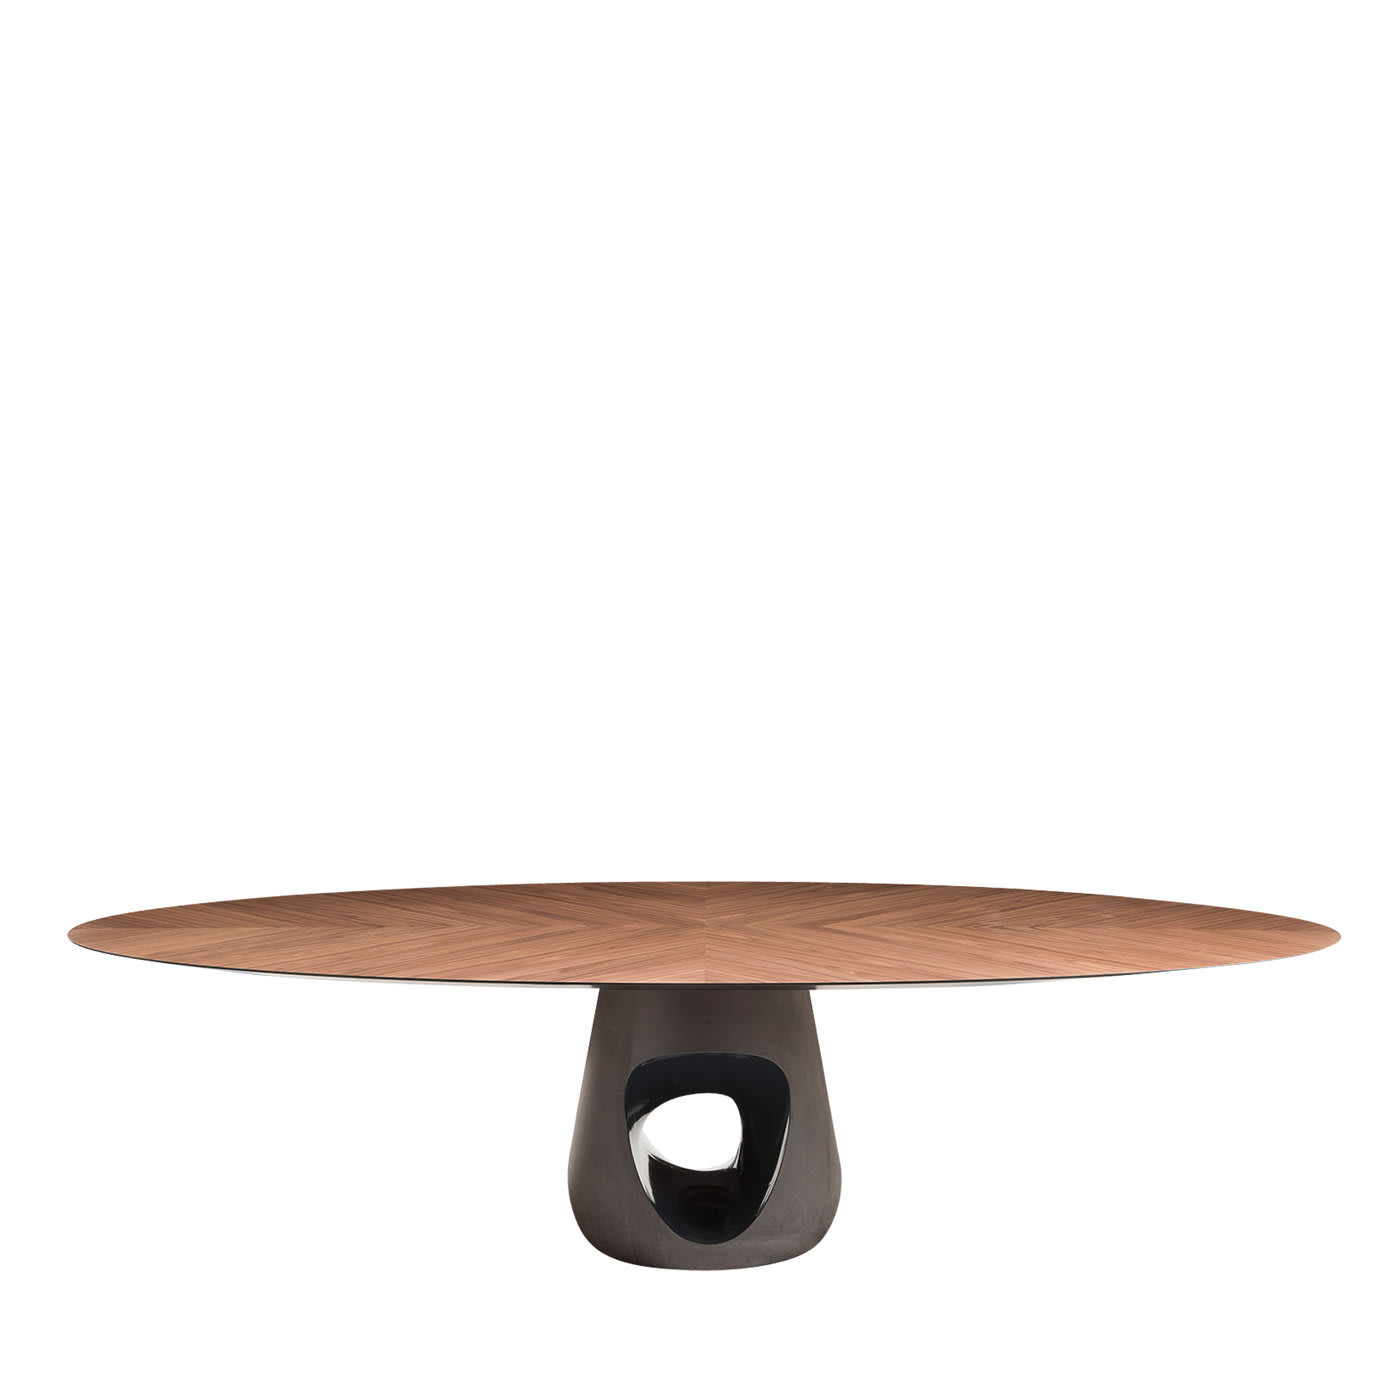 Barbara Dining Table with Walnut Top by Renato Zamberlan - Horm